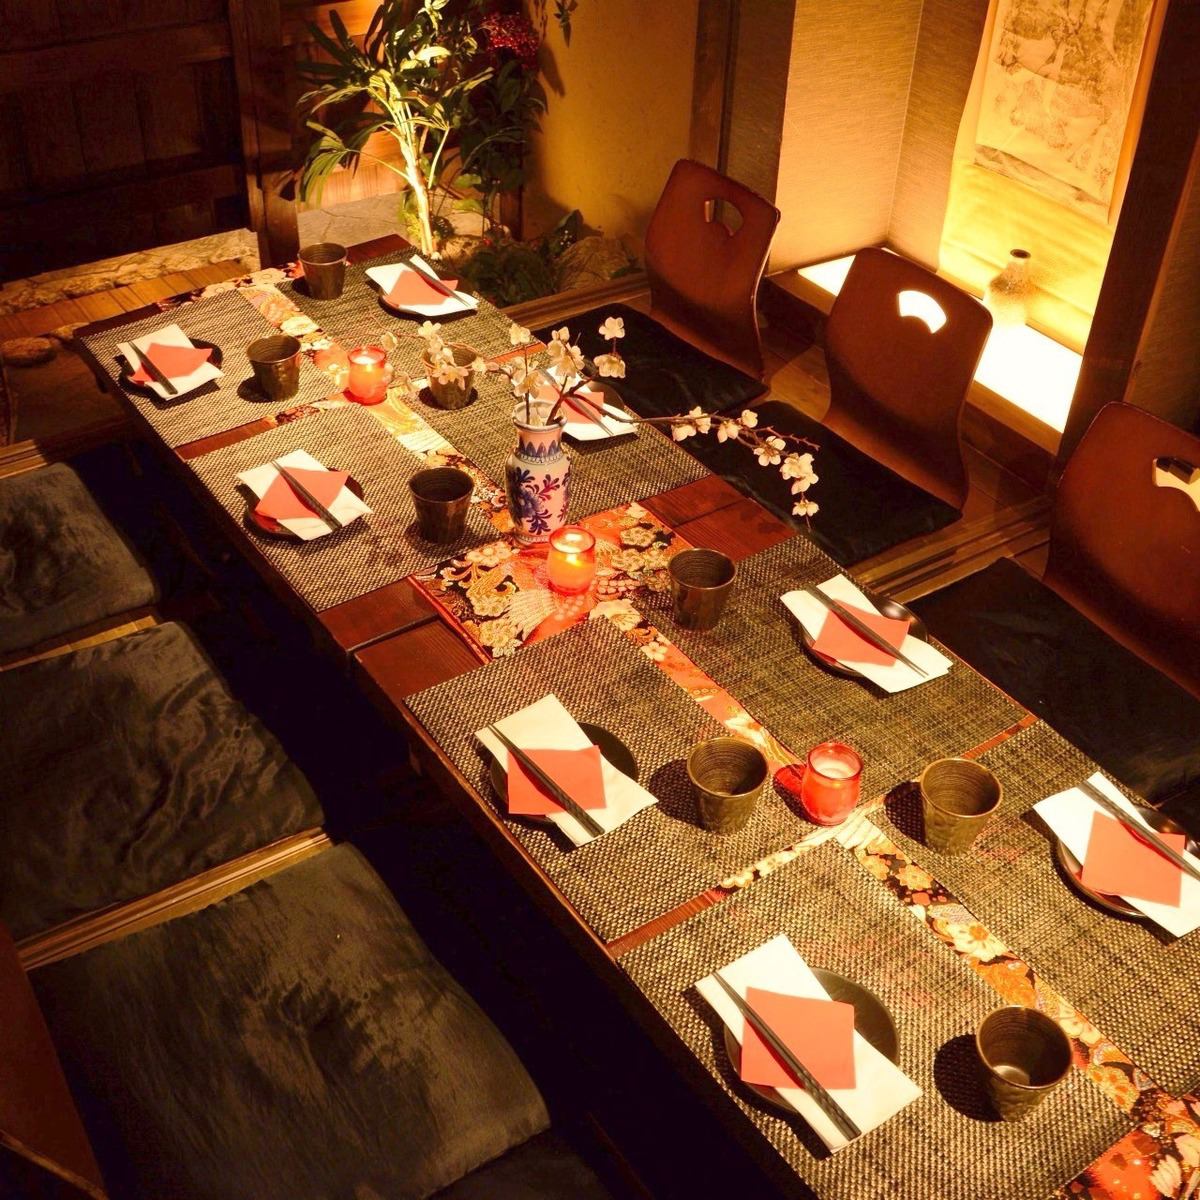 Private rooms where you can feel the atmosphere of Kyoto are popular ♪ 10% off and discount coupons